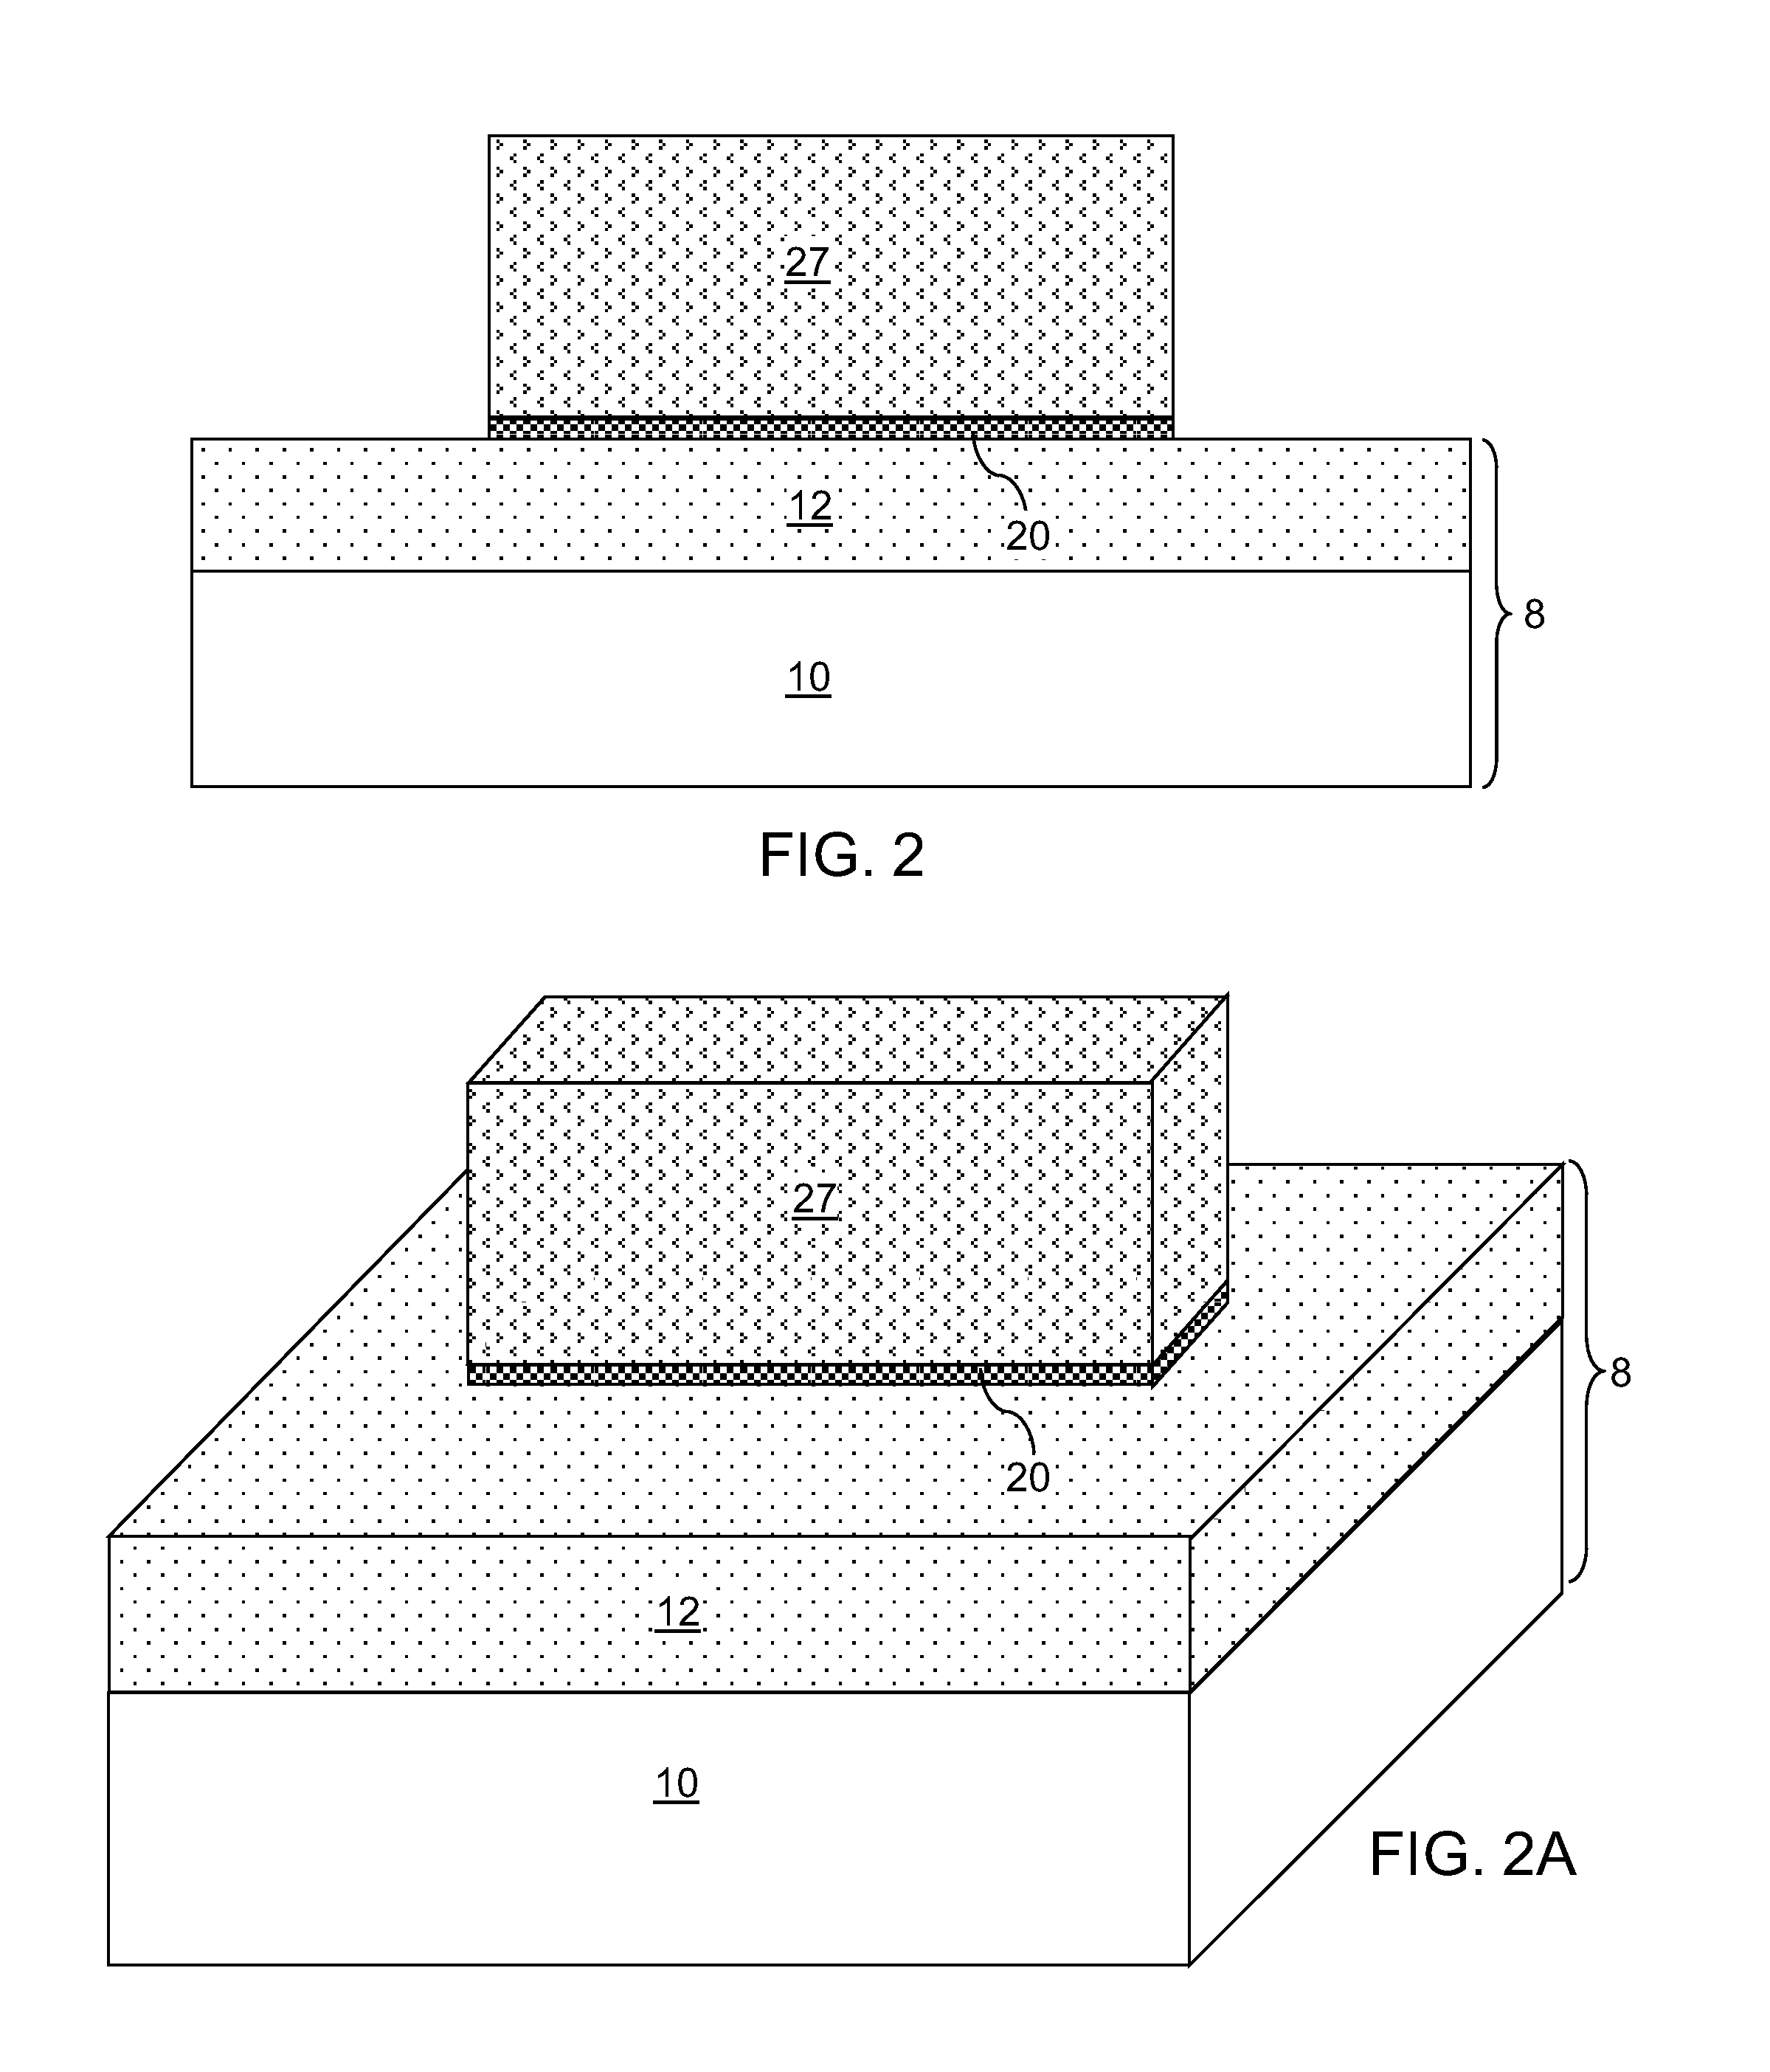 Graphene transistor with a self-aligned gate